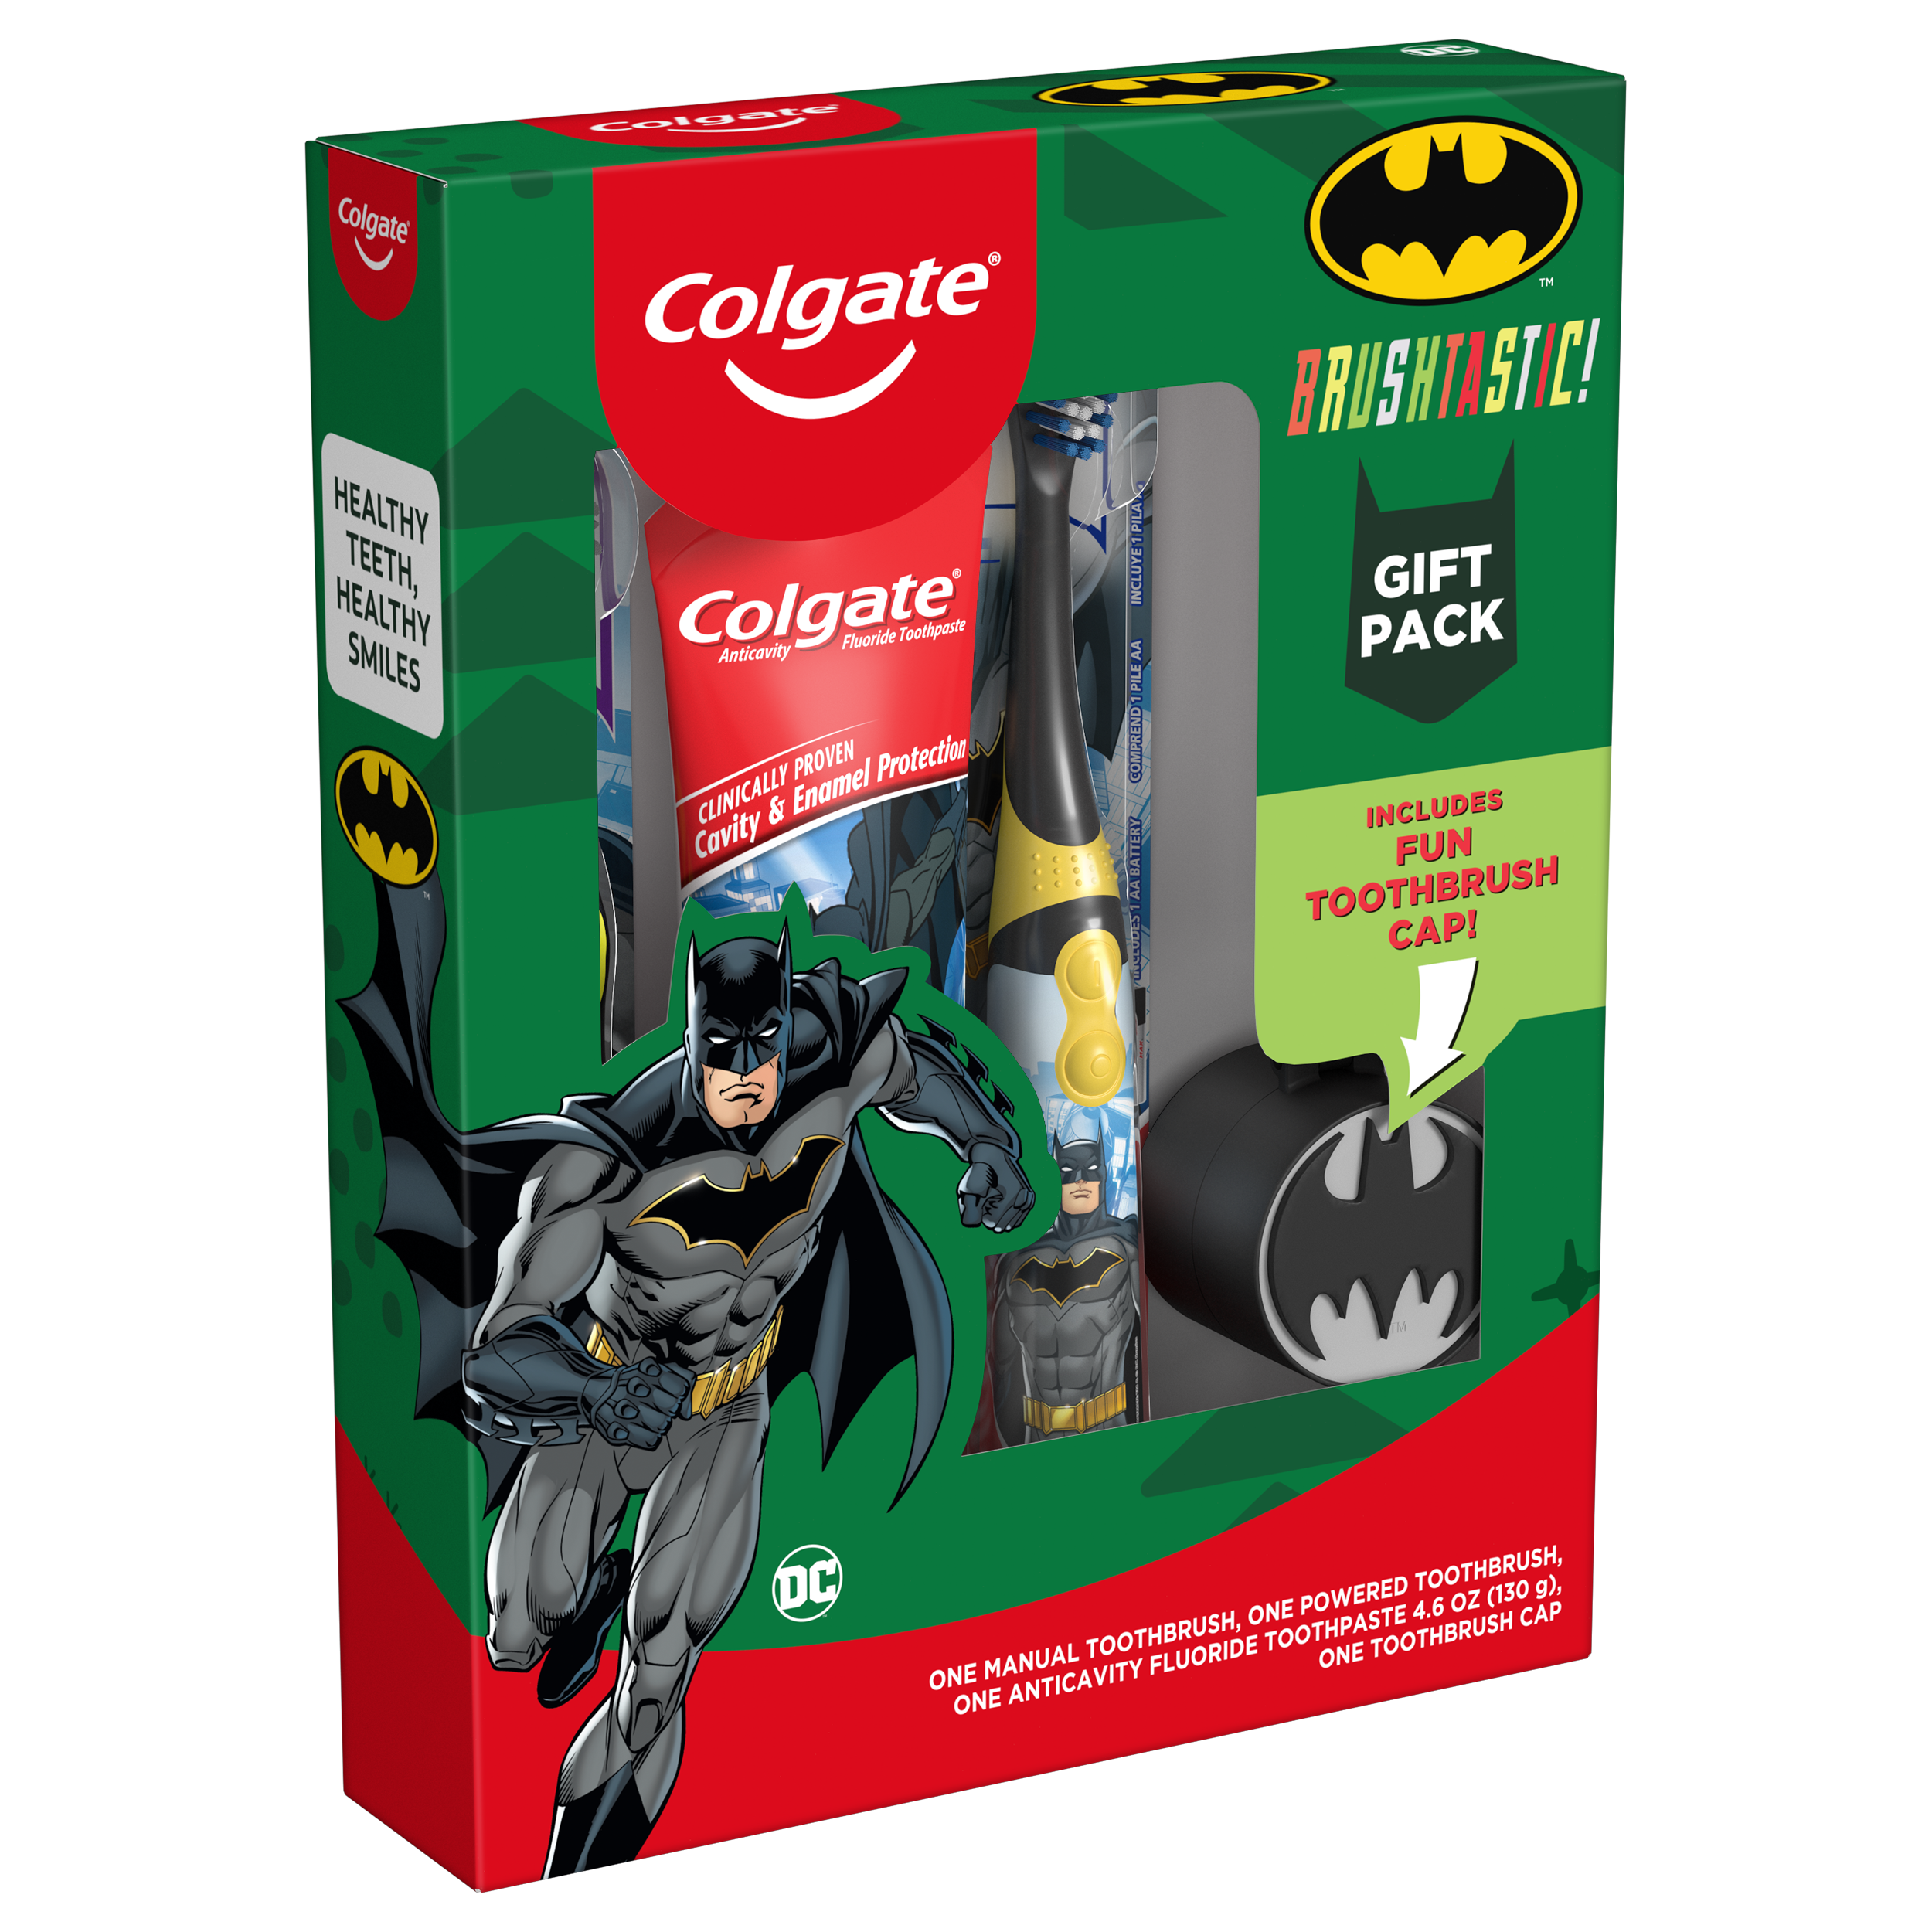 Colgate Kids Toothpaste, Manual and Battery Kids Toothbrushes with Toothbrush Cover Gift Set, Batman, 4 Pc - image 4 of 5